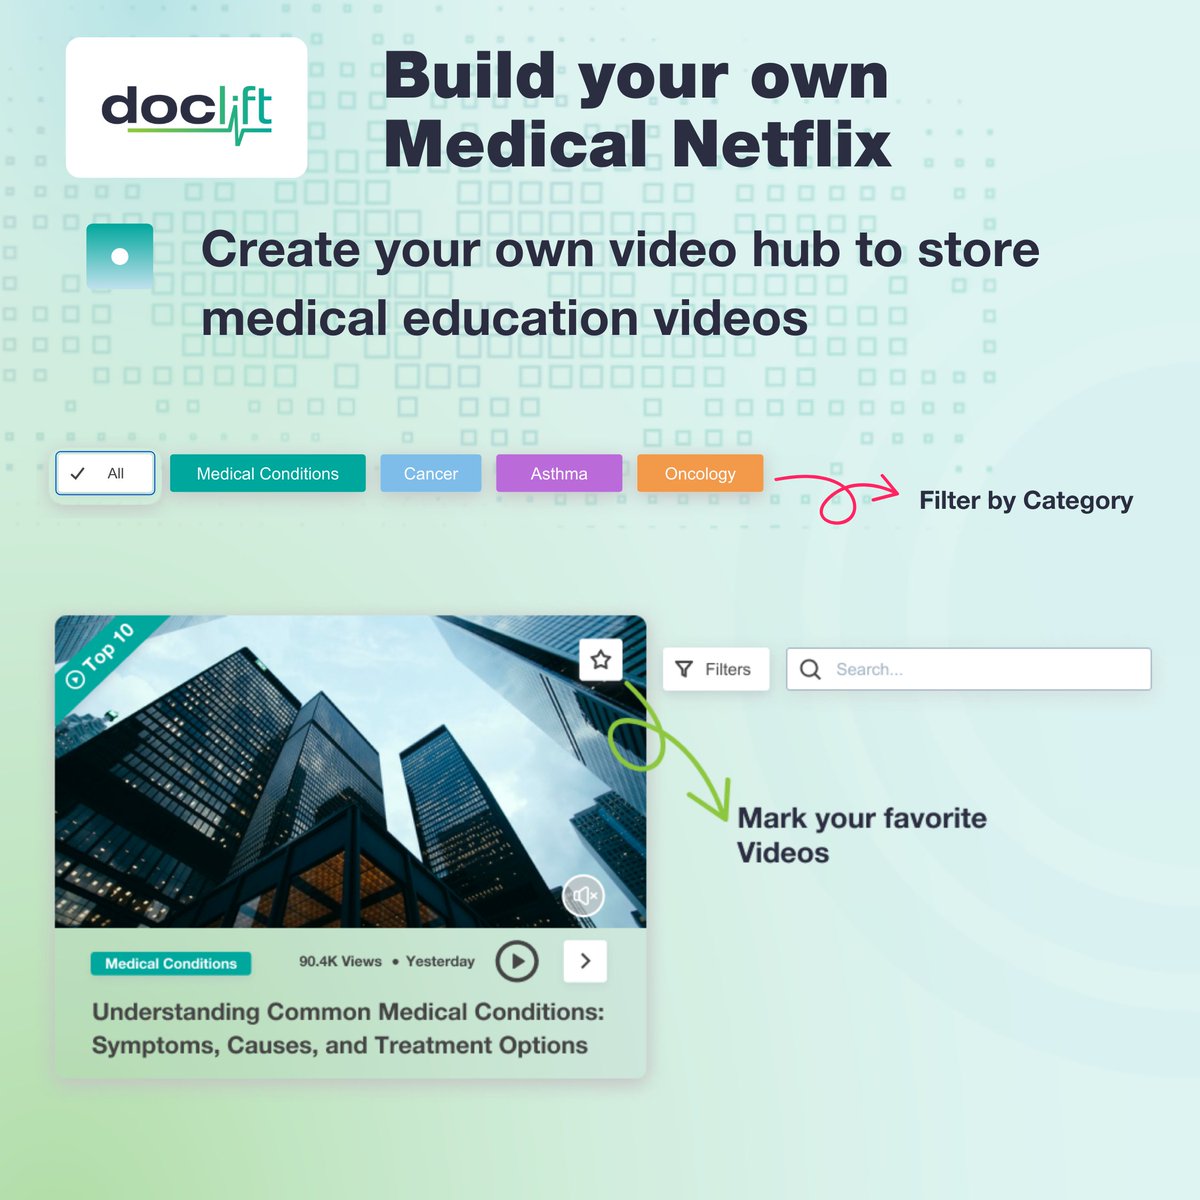 doclift features also include having your own library to store videos and documents in an e-learning setting
#medicaleducation #medicalnews #medicaltraining #medicalevents  #onlinemedicaltraining #healthcare #DigitalHealth #PatientEngagement #HealthcareAI #chatgpt